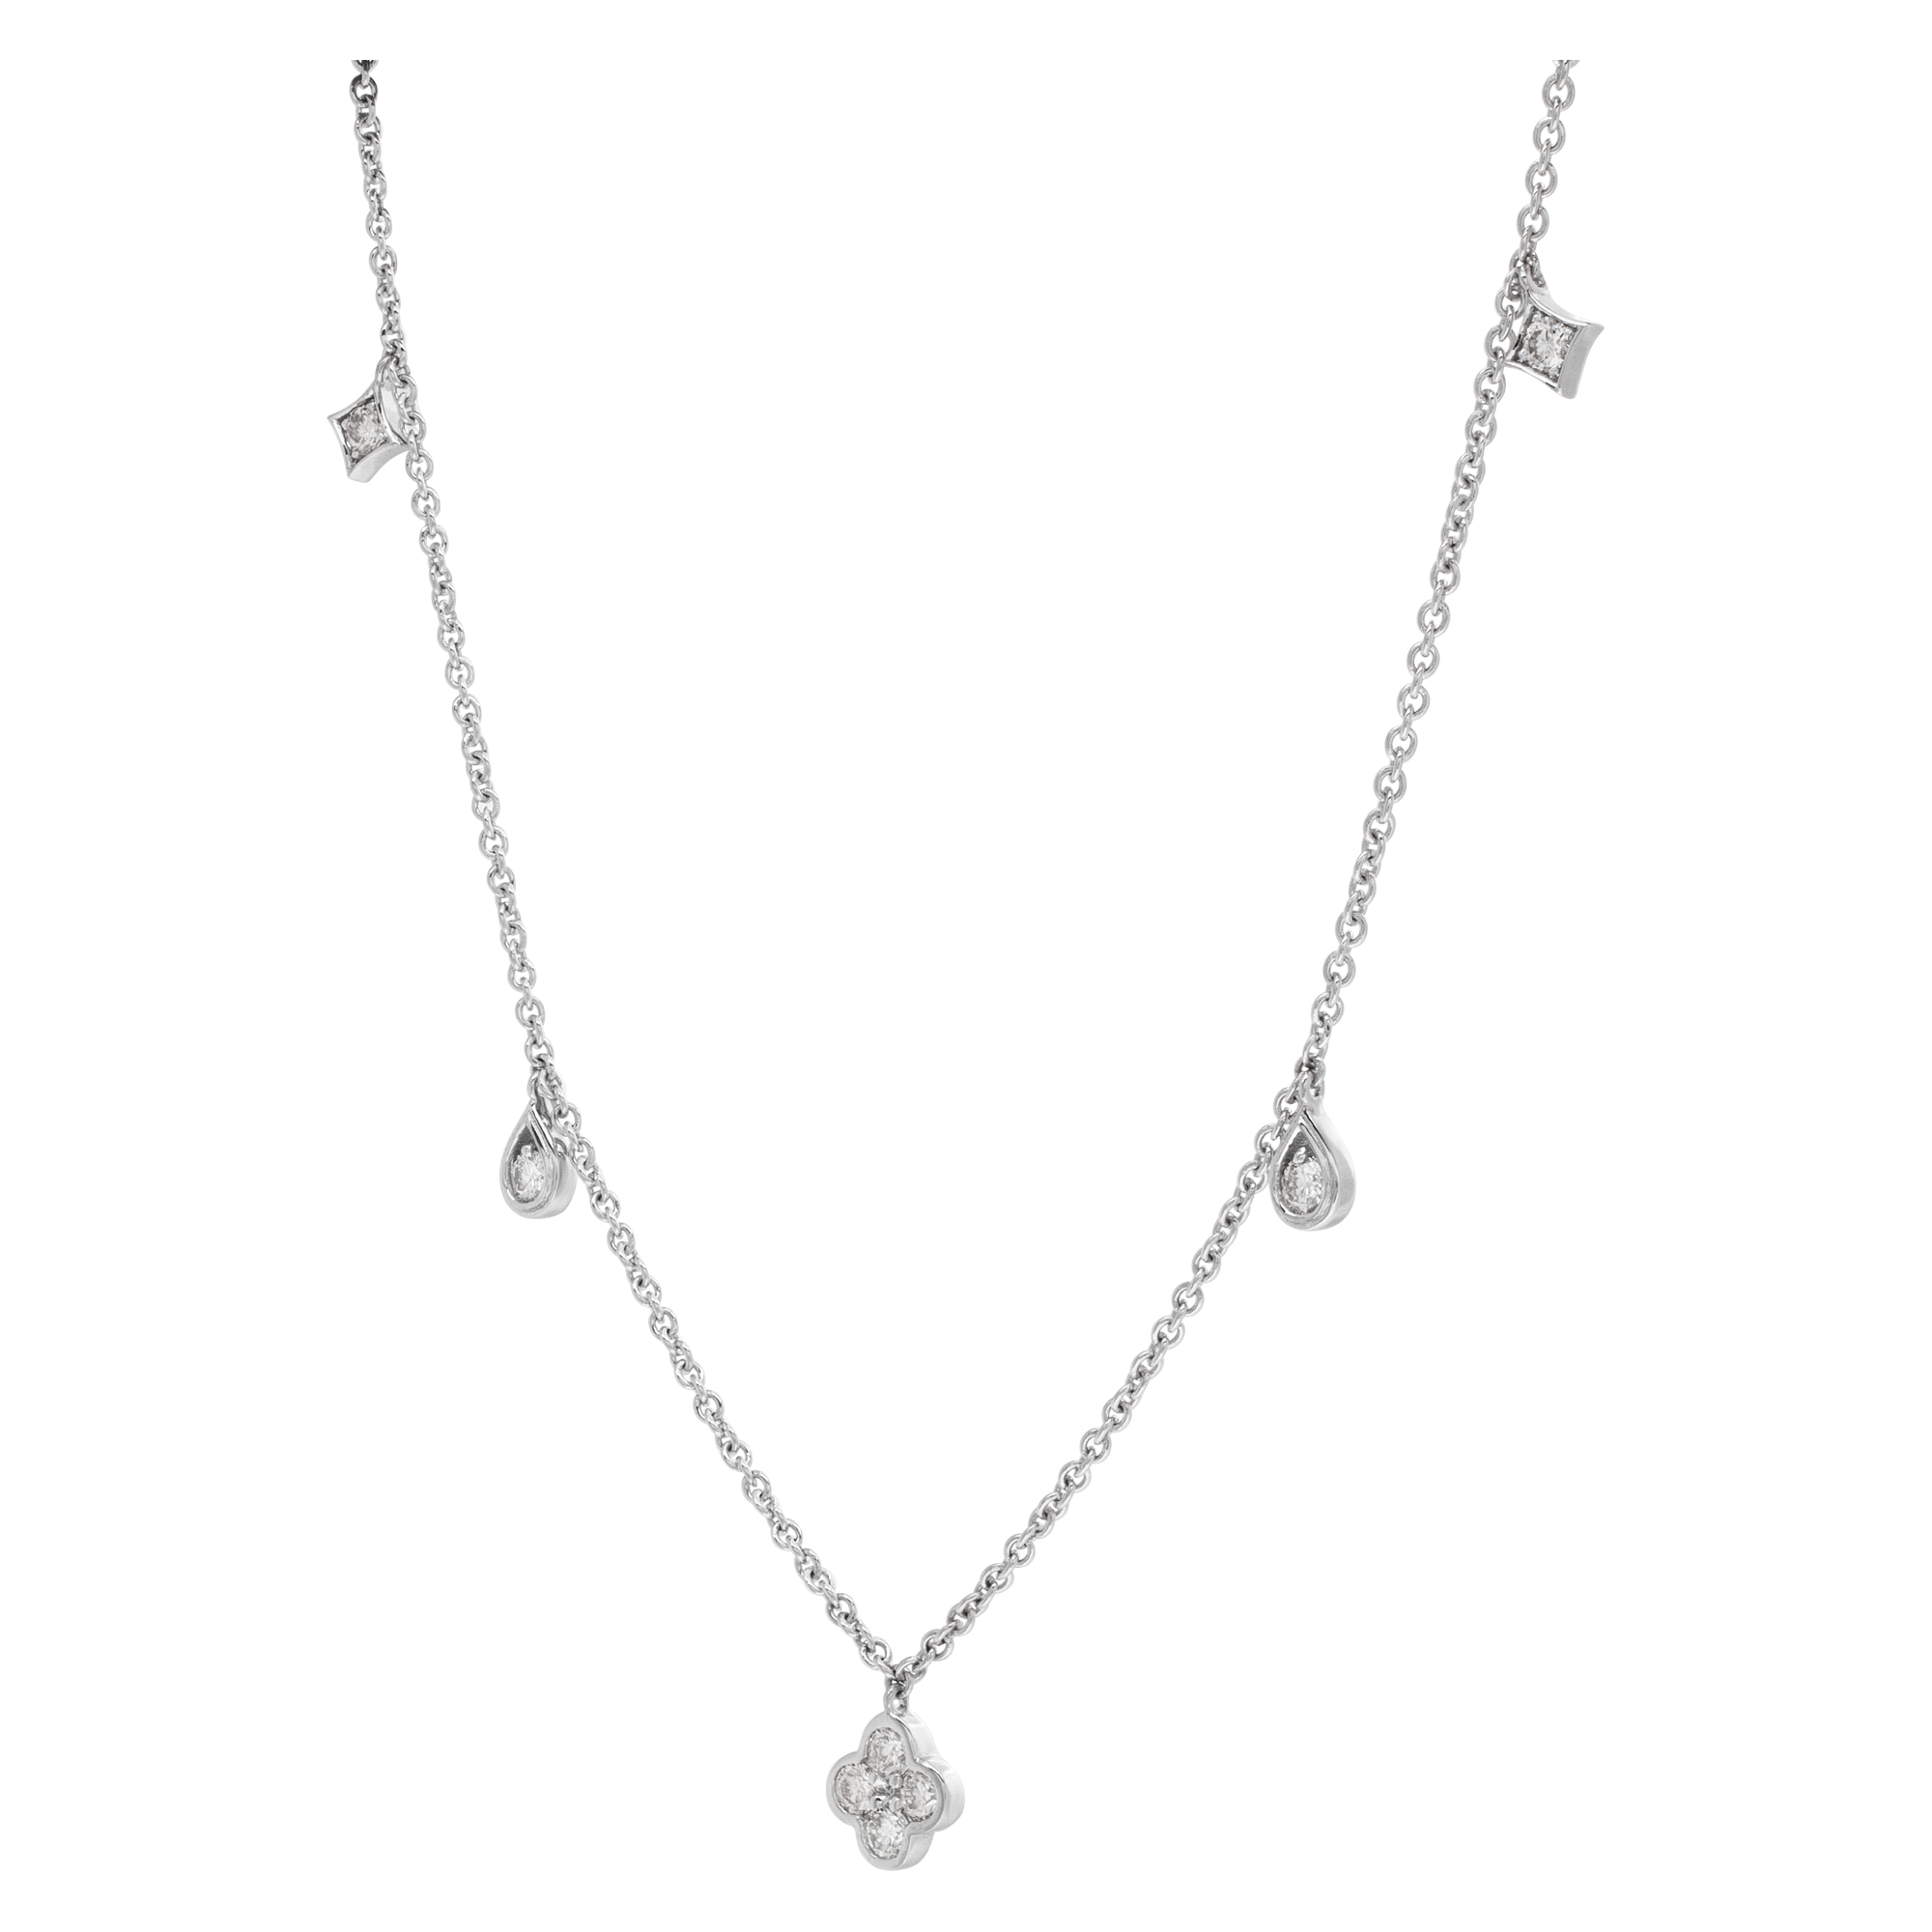 "Diamonds by the Yard" 18 inches chain with approx 1 carat total weight bezeled set, full cut round brilliant diamonds set in 18k white gold. Diamonds estimate: I/J color, SI clarity. Length 18 inches image 4